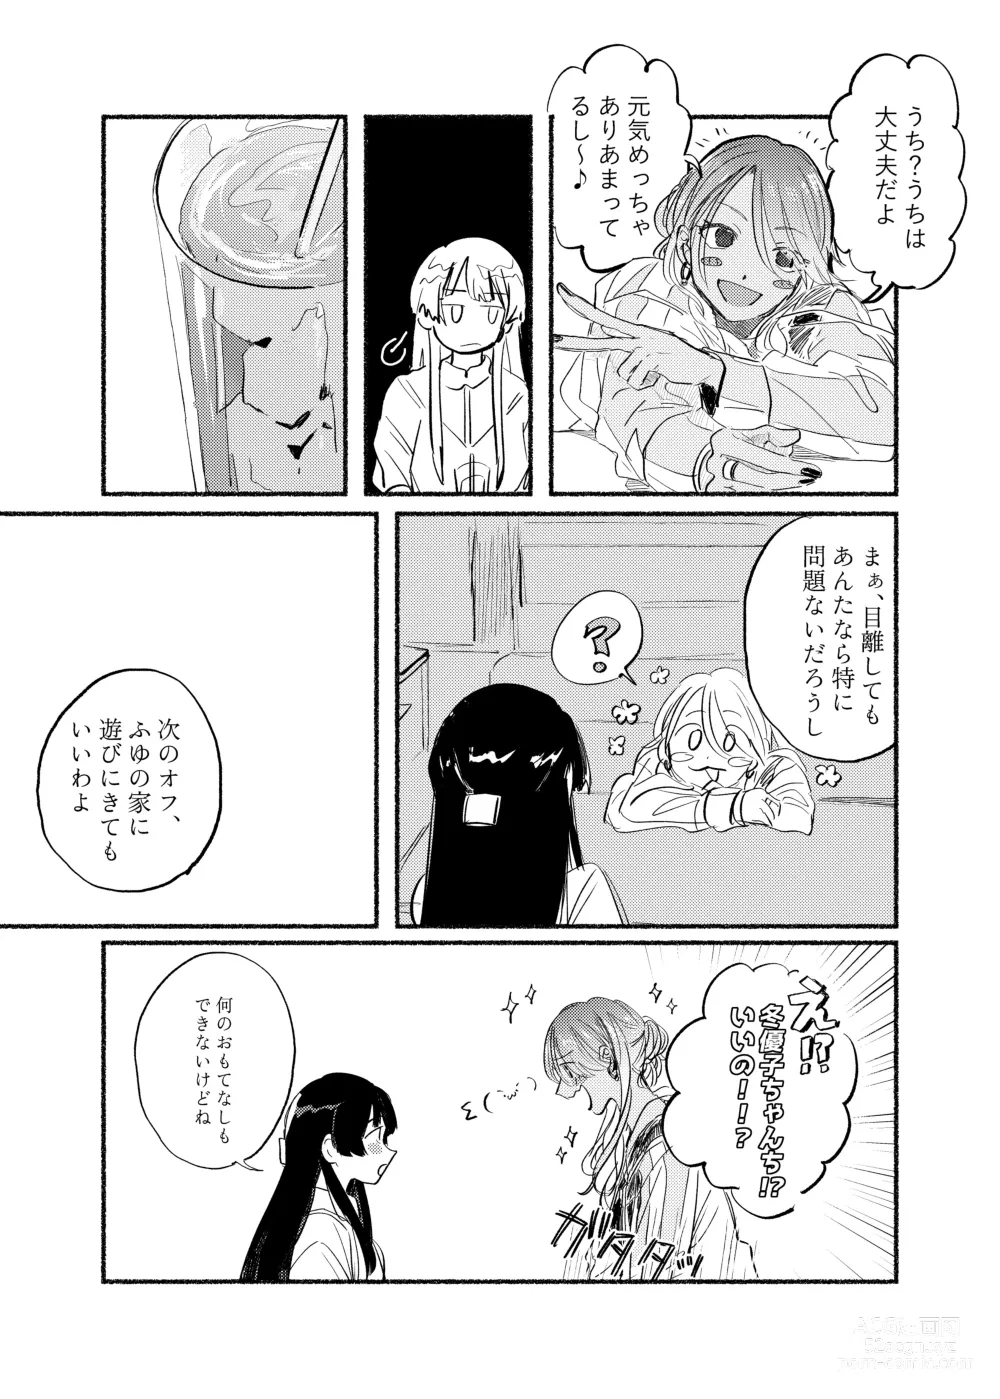 Page 6 of doujinshi IDENTITY REALIZE